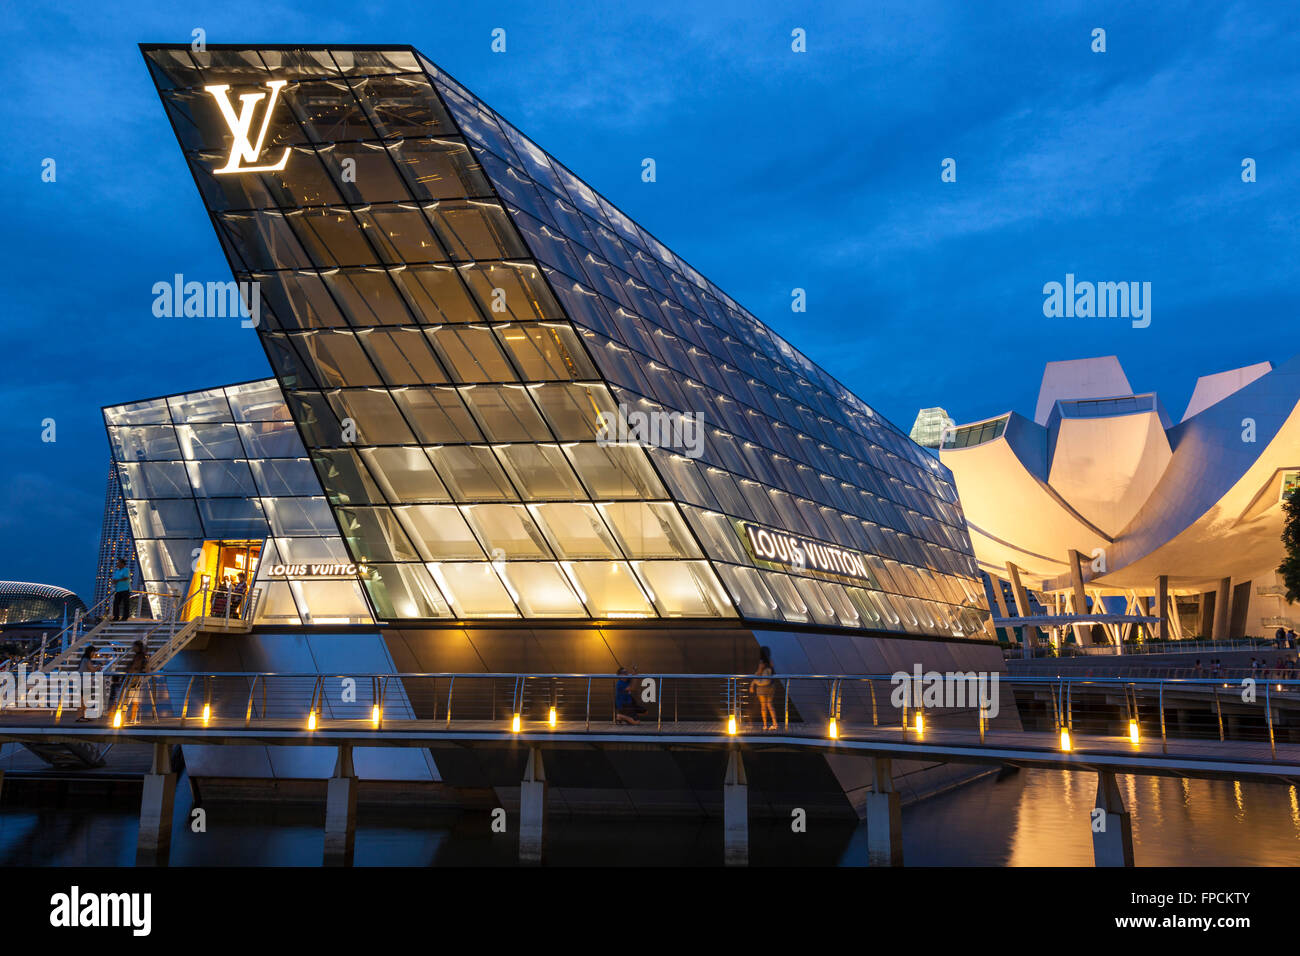 A view of the Louis Vuitton Island Maison in Singapore, the building Stock Photo: 99853291 - Alamy